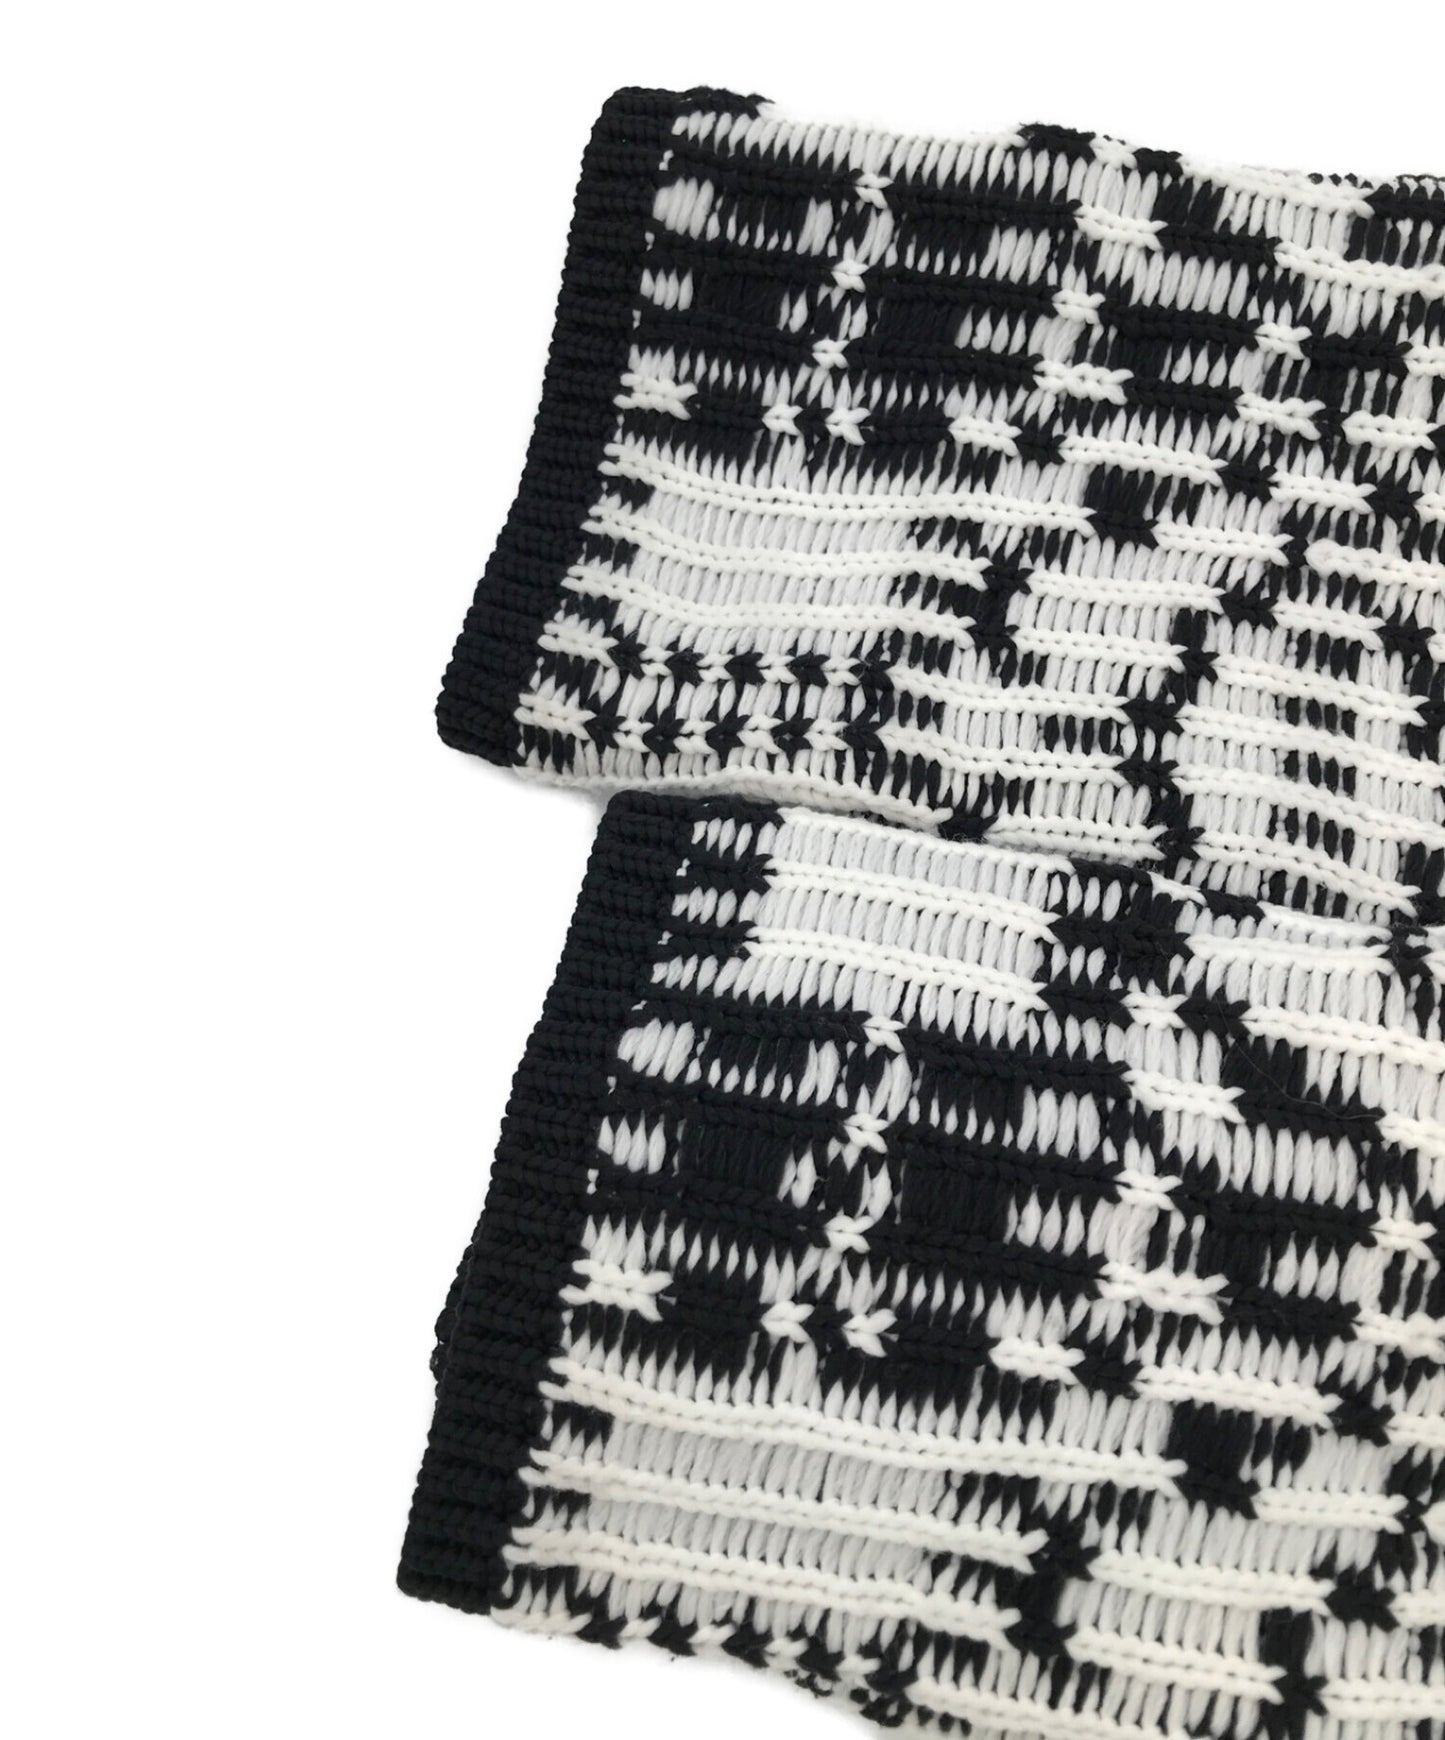 [Pre-owned] COMME des GARCONS HOMME PLUS Twisted Asymmetric Knits / Asymmetric Knits / Design Knits PH-N018